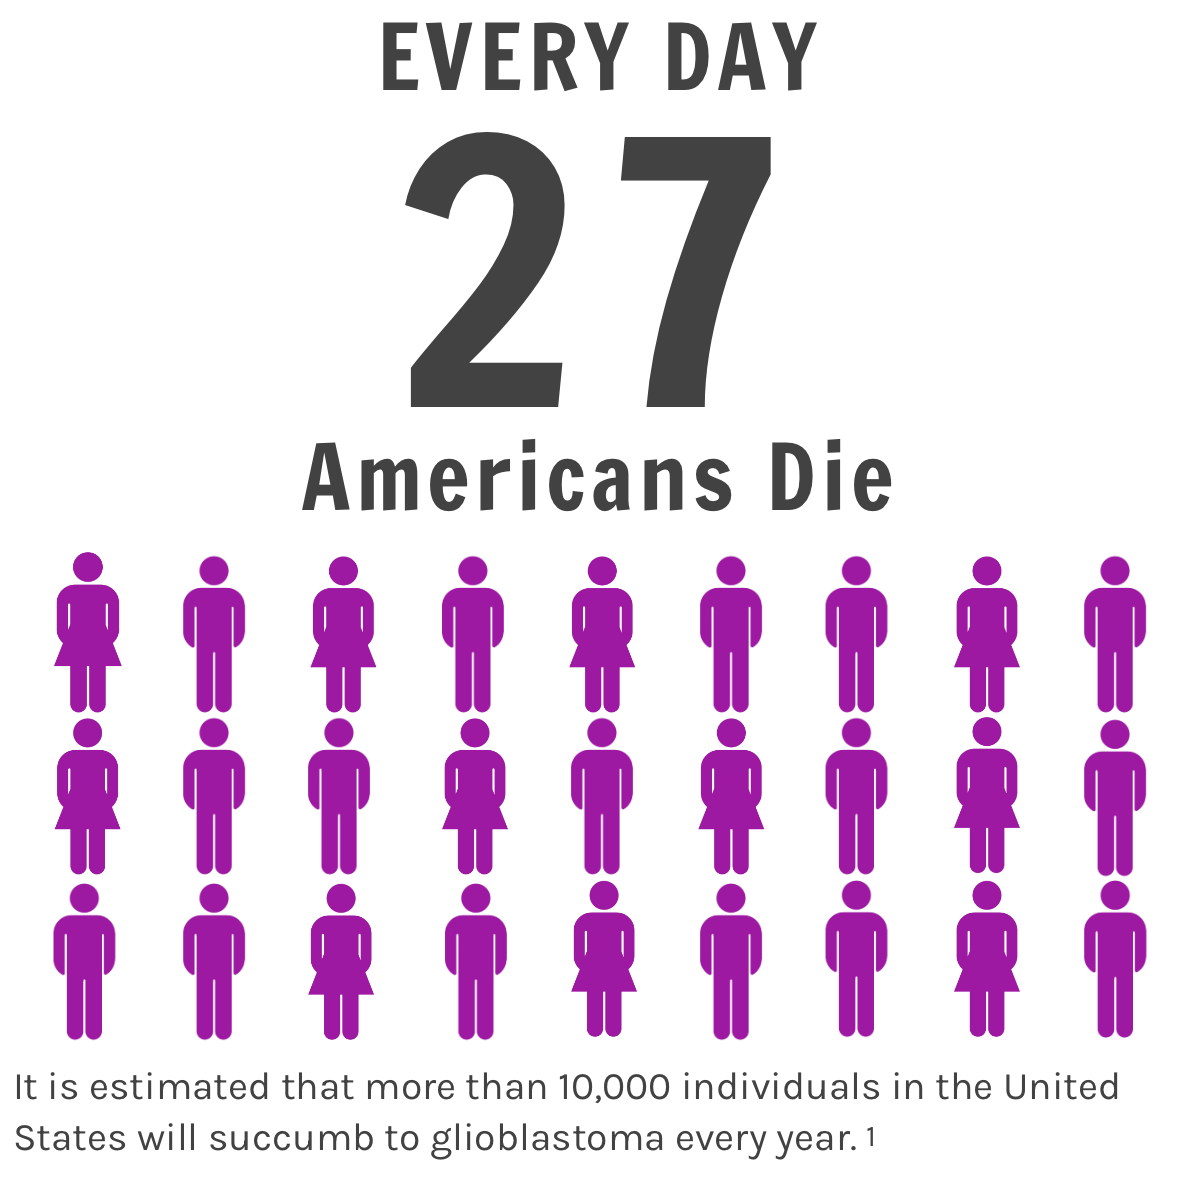 27 Americans die every day from Glioblastoma